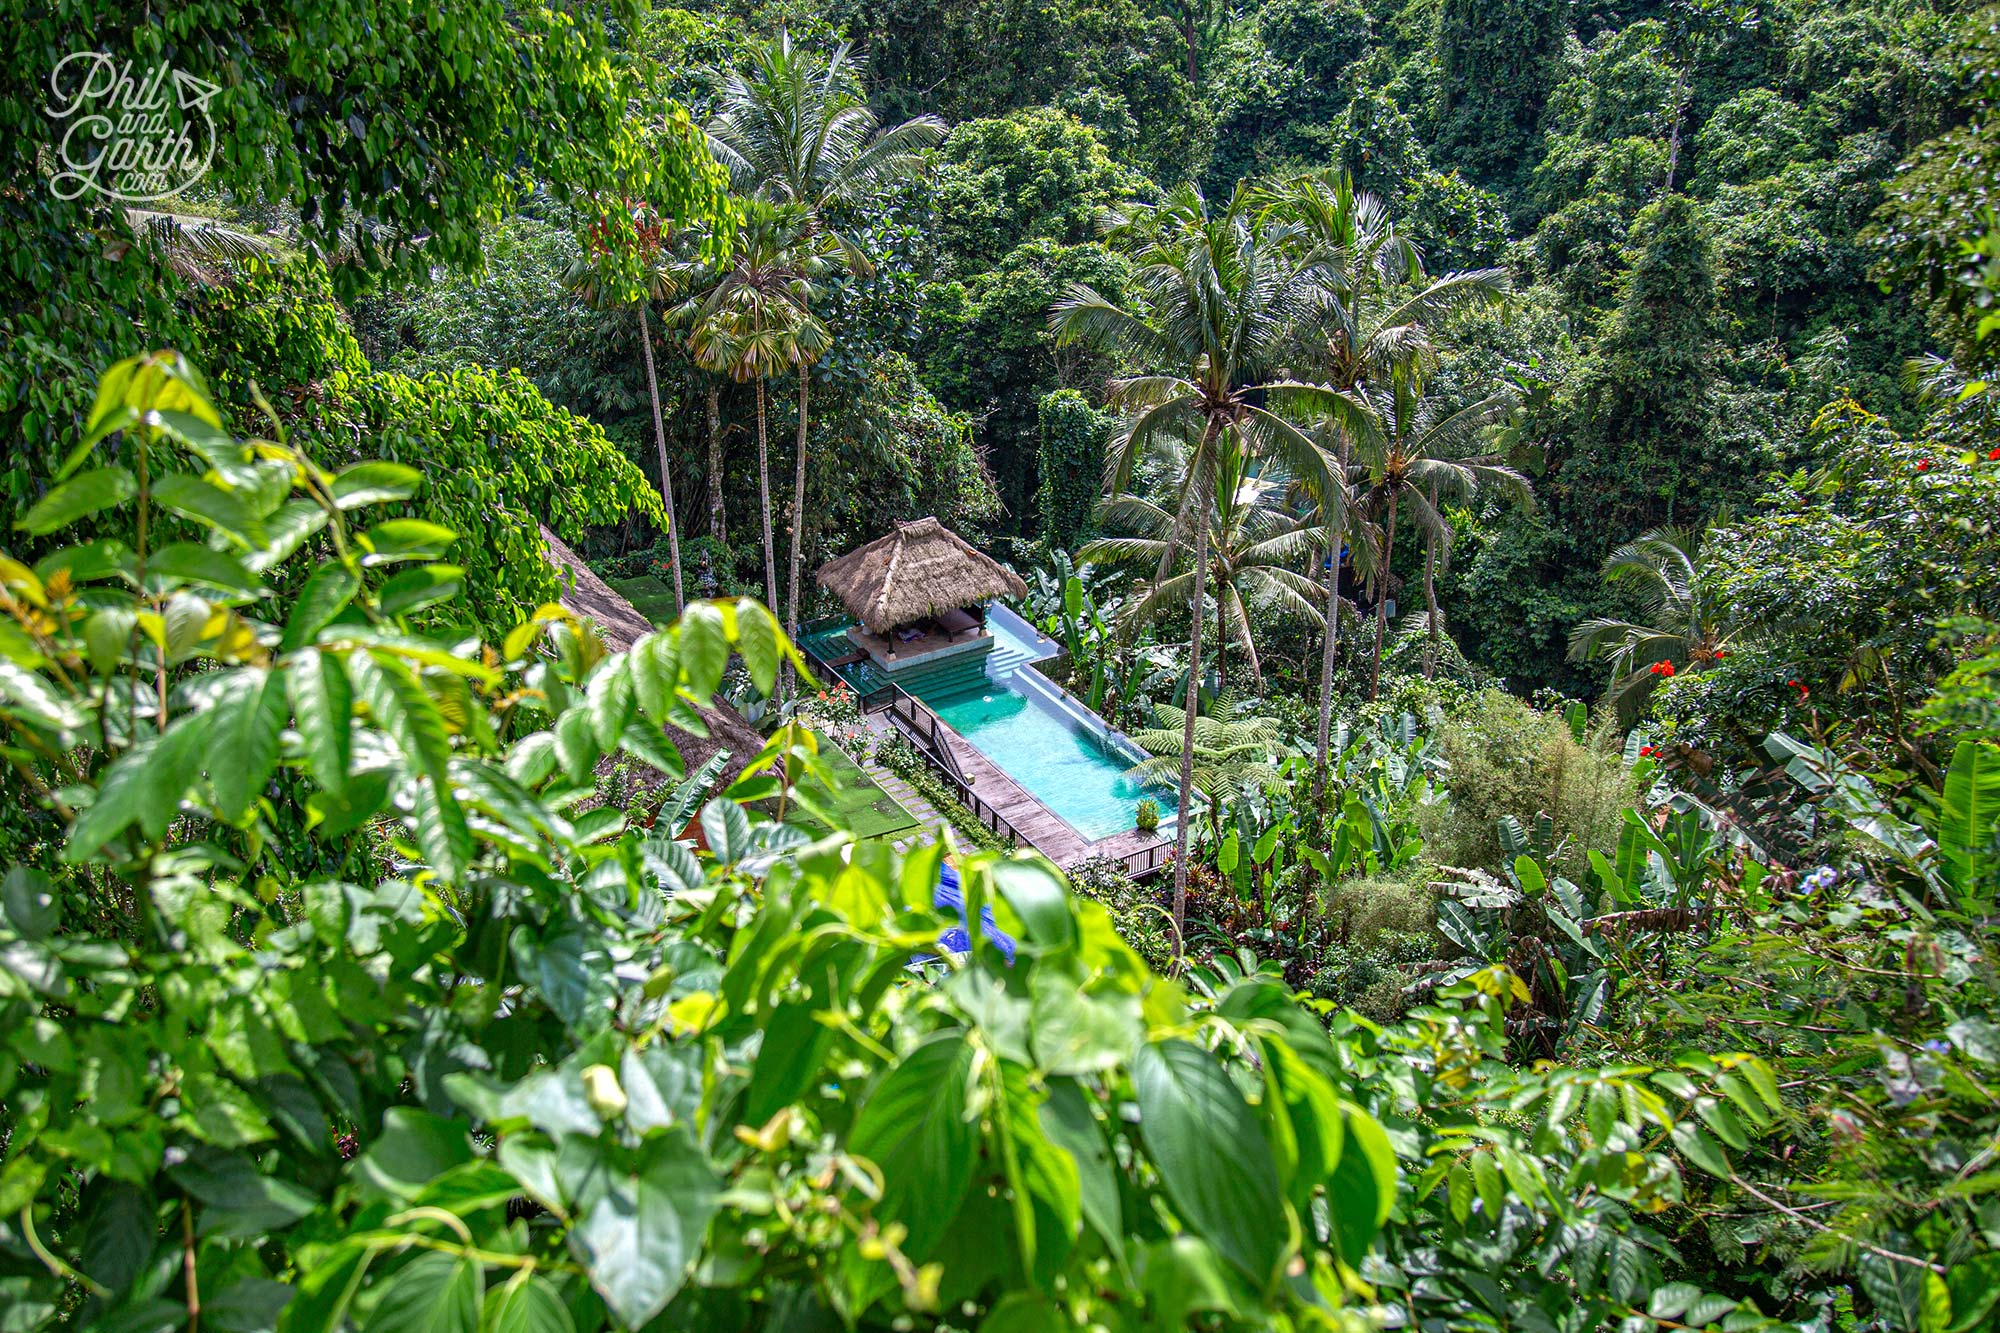 Wandering around the gardens you'll discover the The Hidden Palace - the ultimate private villa accommodation in the jungle